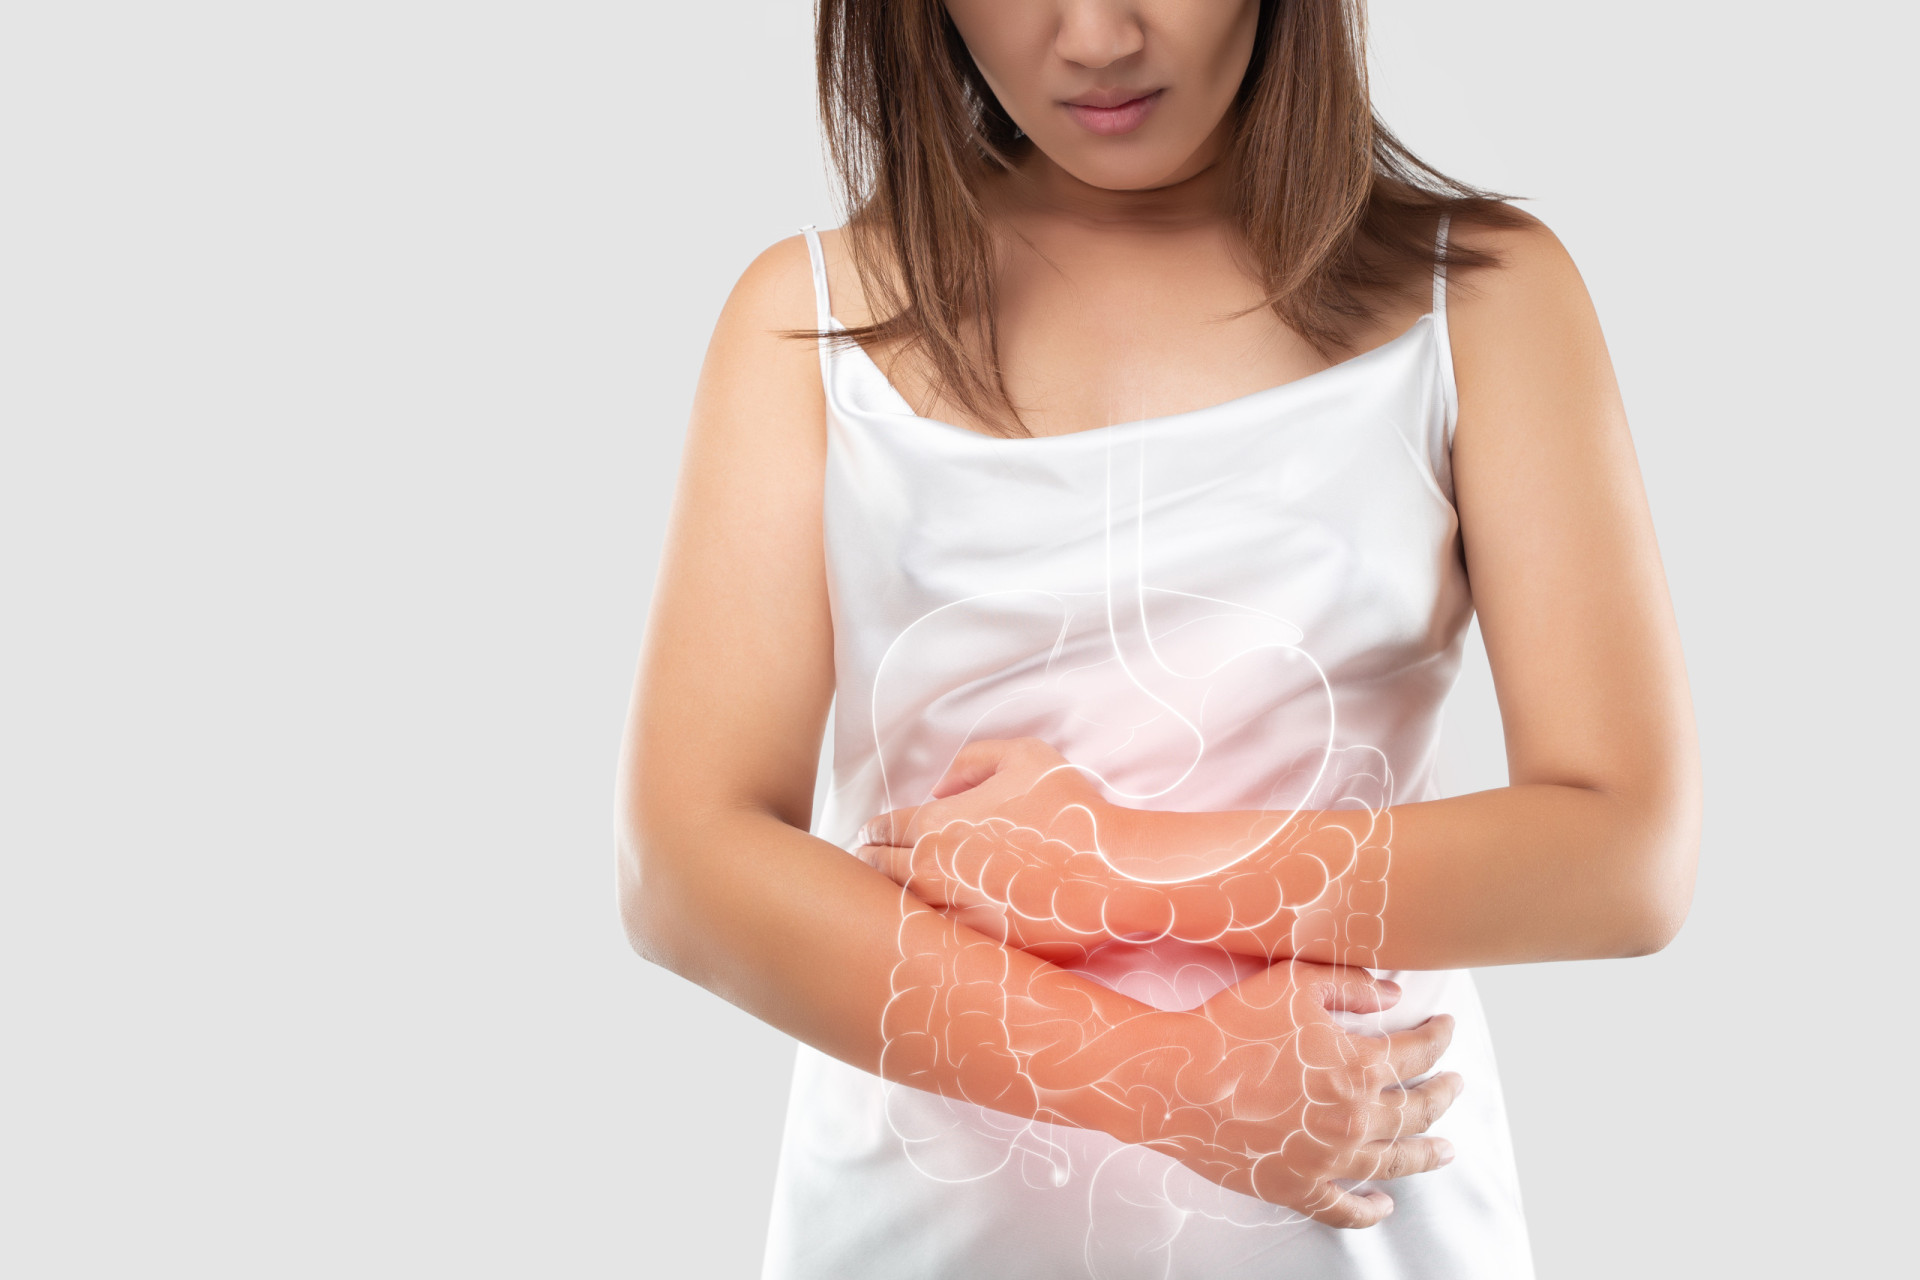 <p>Crohn's disease or ulcerative colitis increase the risk of DVT.</p><p>You may also like:<a href="https://www.starsinsider.com/n/438839?utm_source=msn.com&utm_medium=display&utm_campaign=referral_description&utm_content=540572en-en"> The best whiskey cocktails you just have to try</a></p>